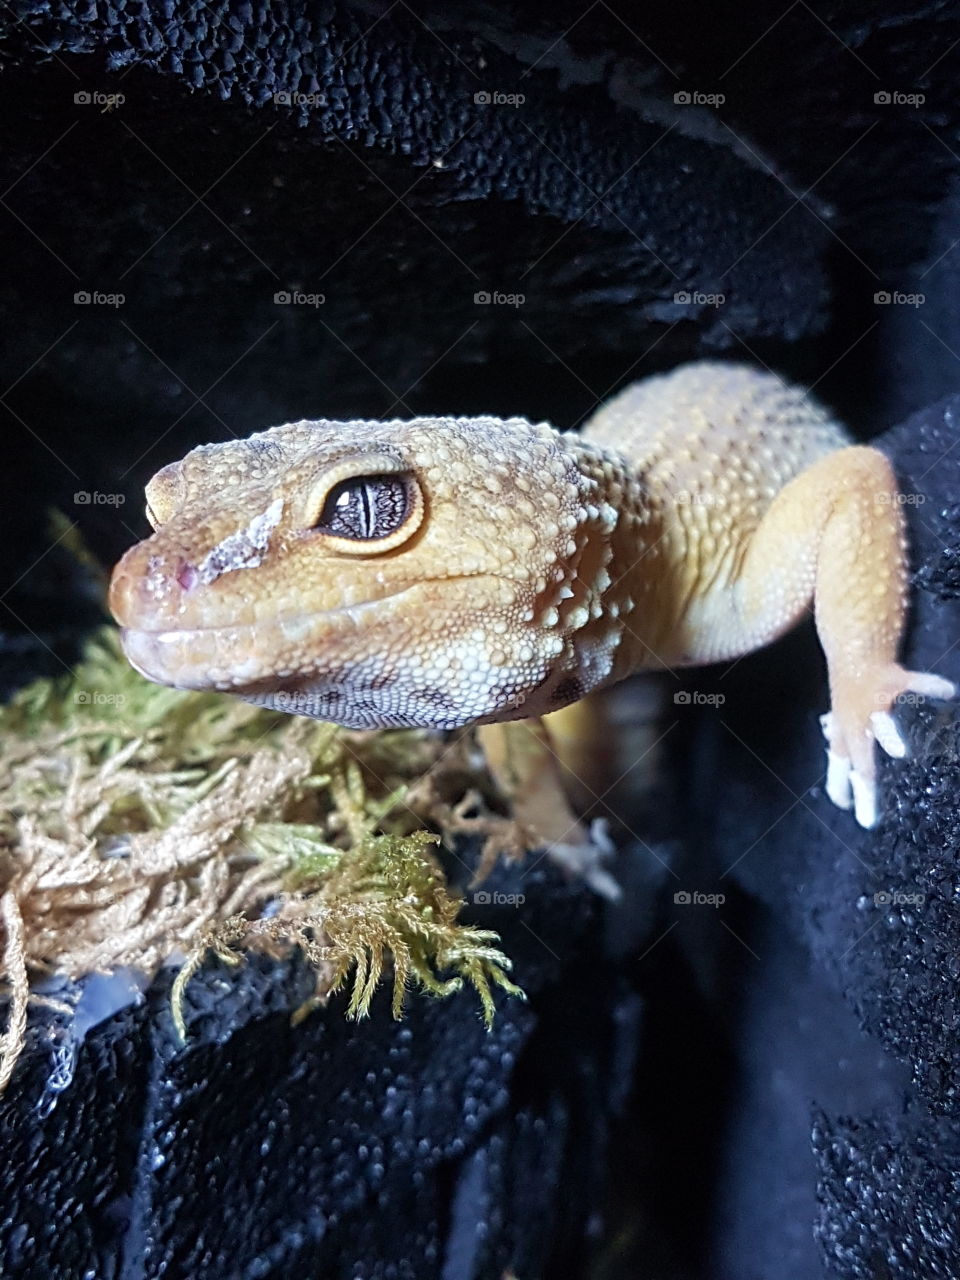 Lilly the Gecko